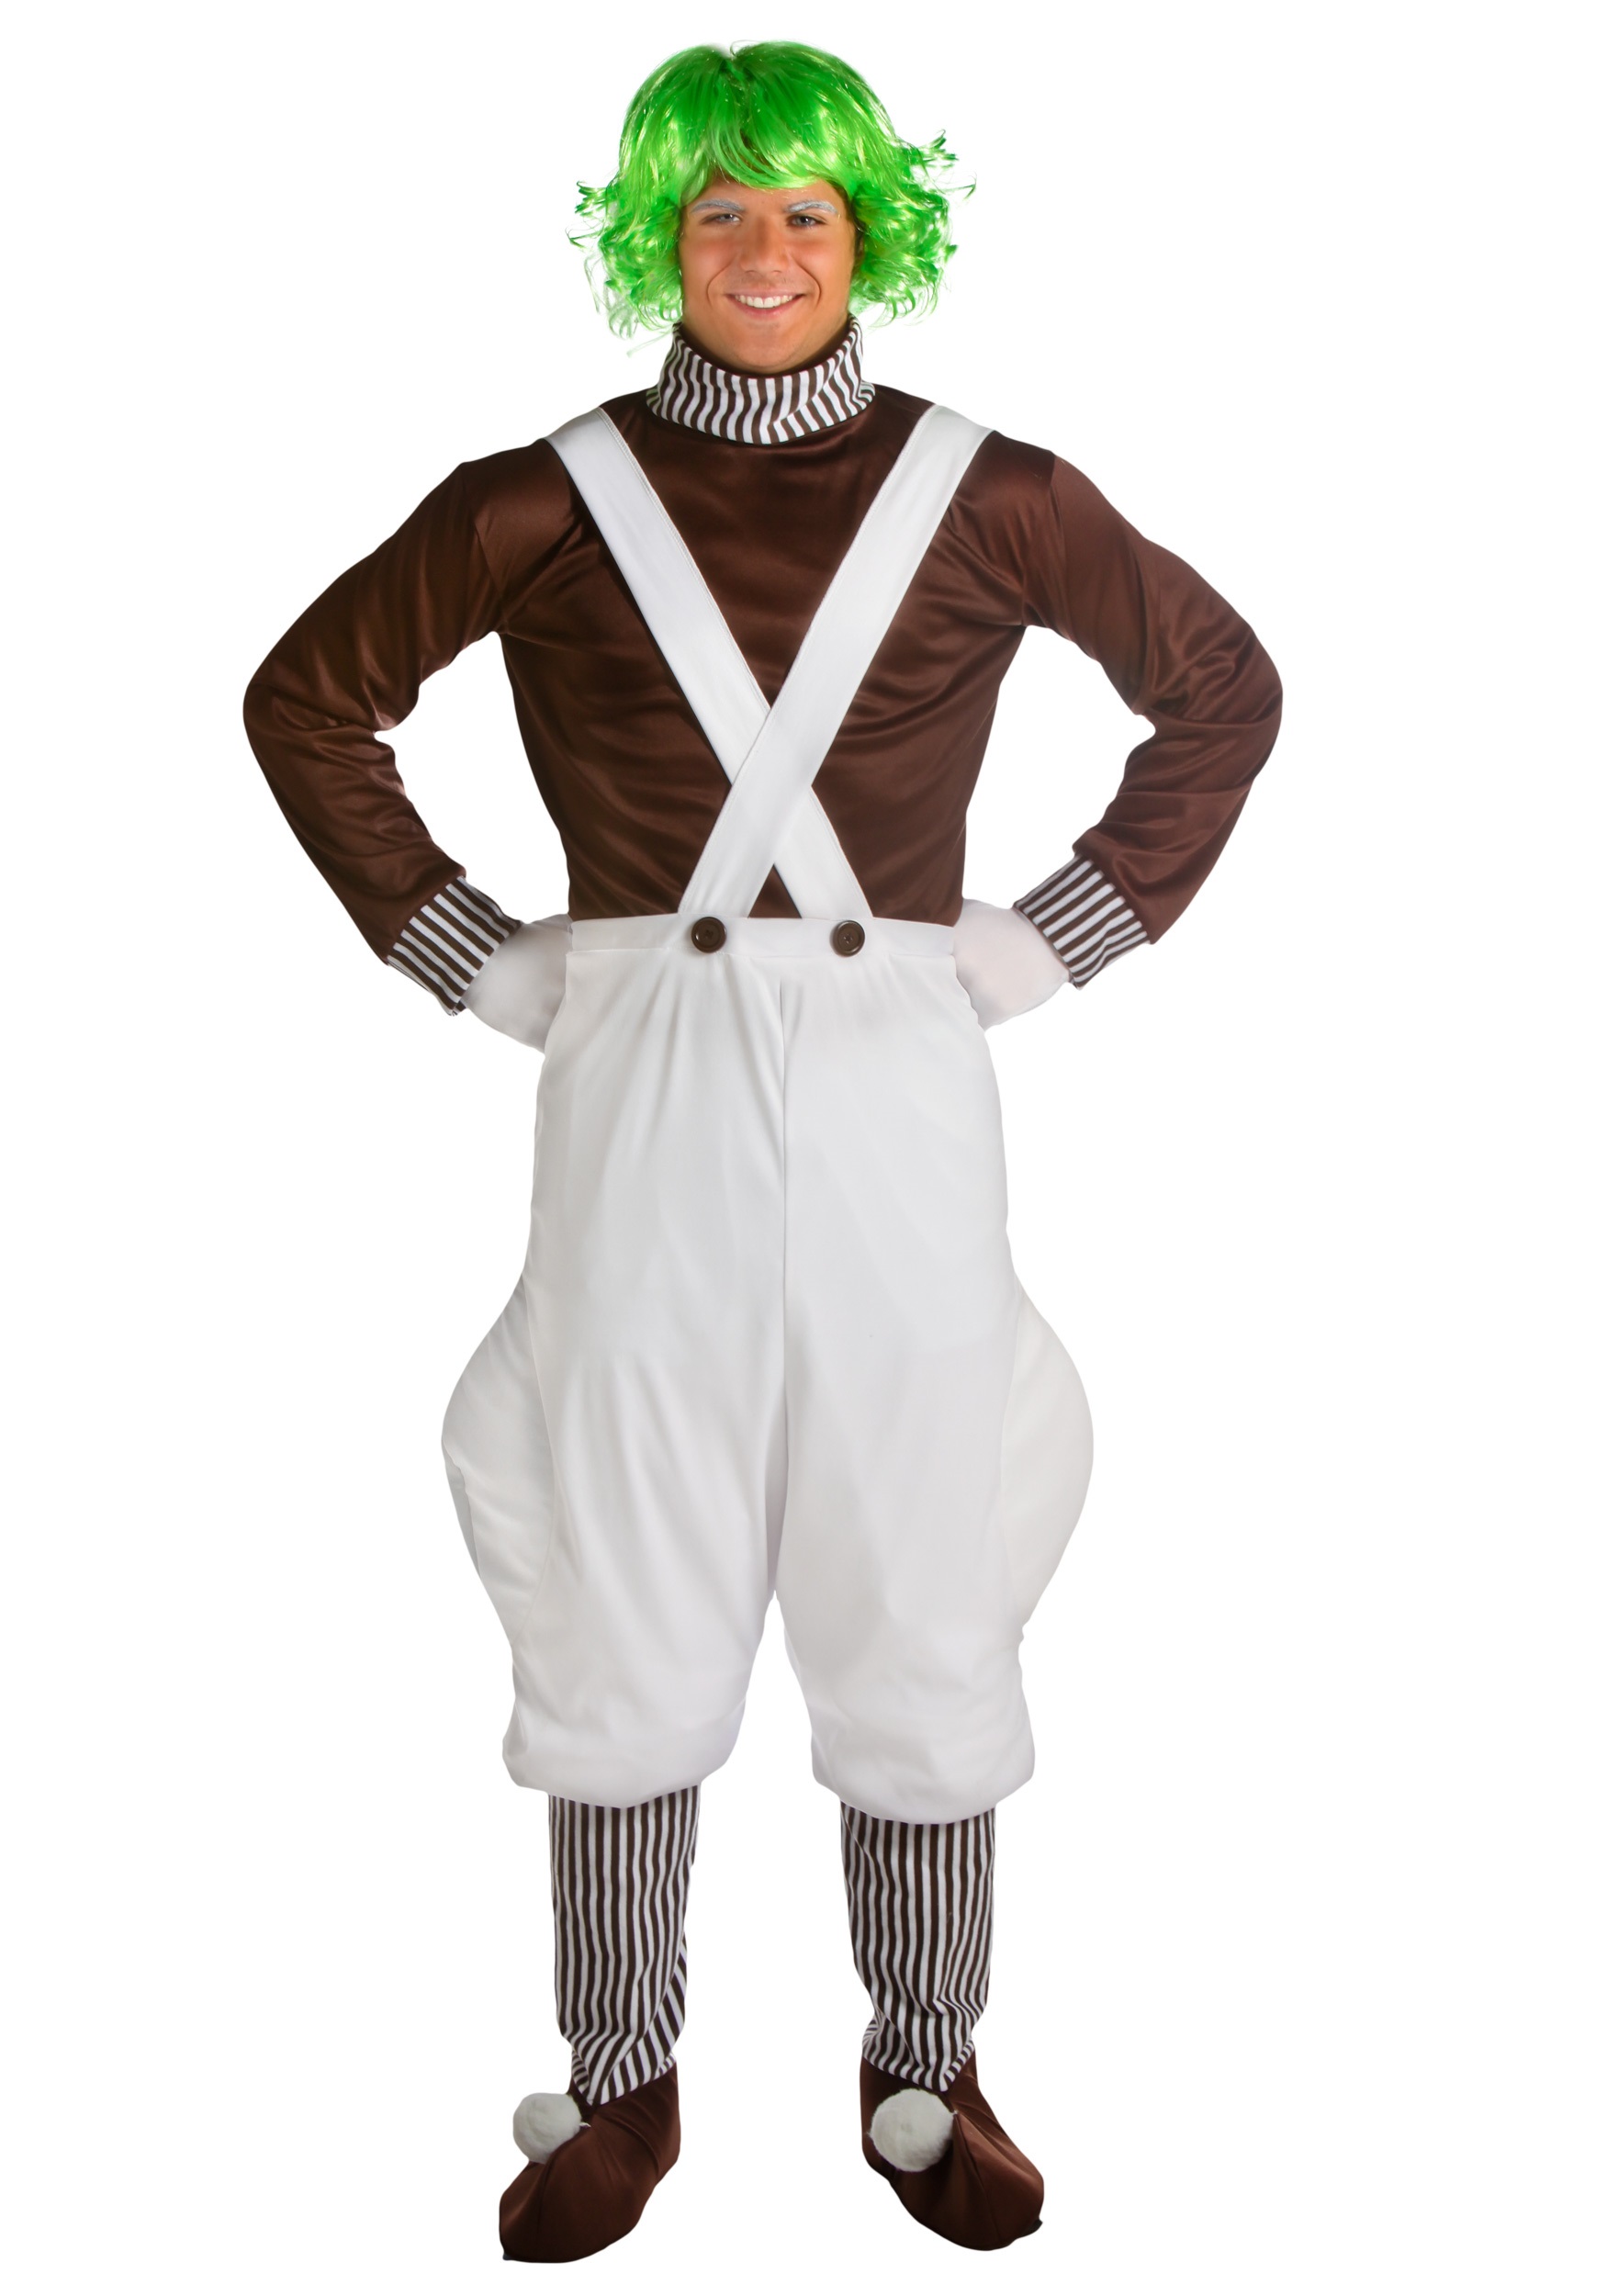 Photos - Fancy Dress WORKER FUN Costumes Chocolate Factory  Plus Size Costume for Men Brown/ 